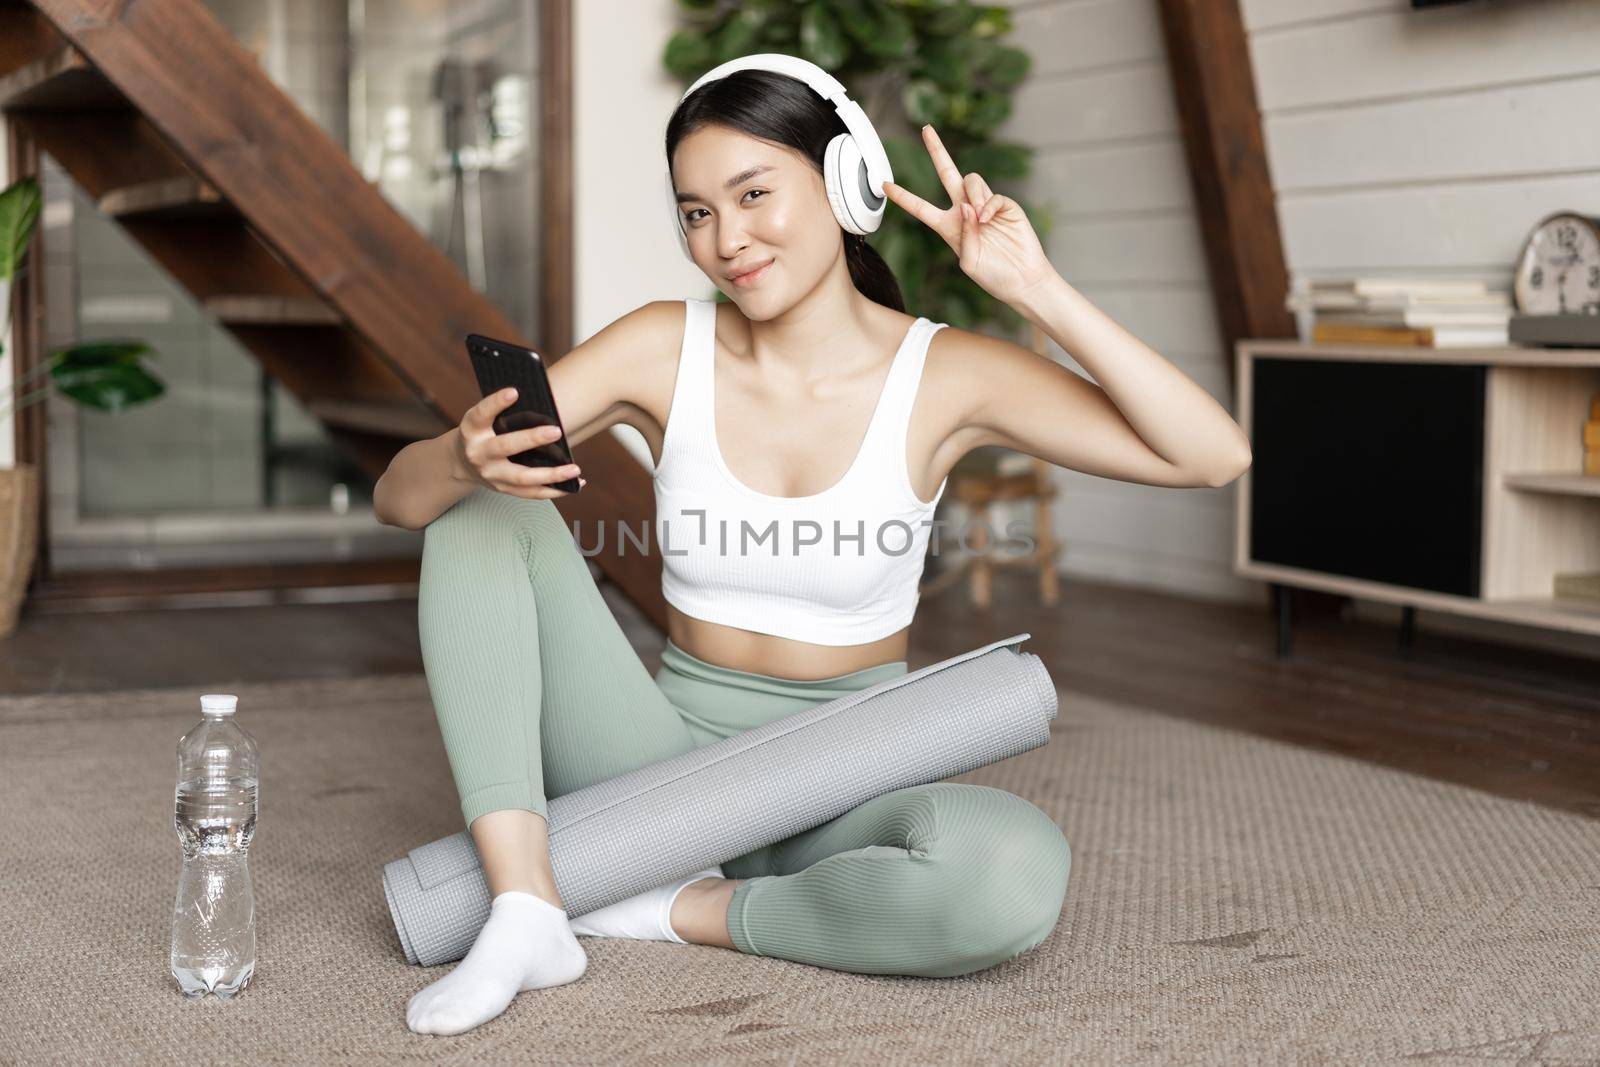 Happy sporty girl sitting on floor at home and taking selfie during workout, wearing headphones and holding smartphone. Concept of sport and lifestyle